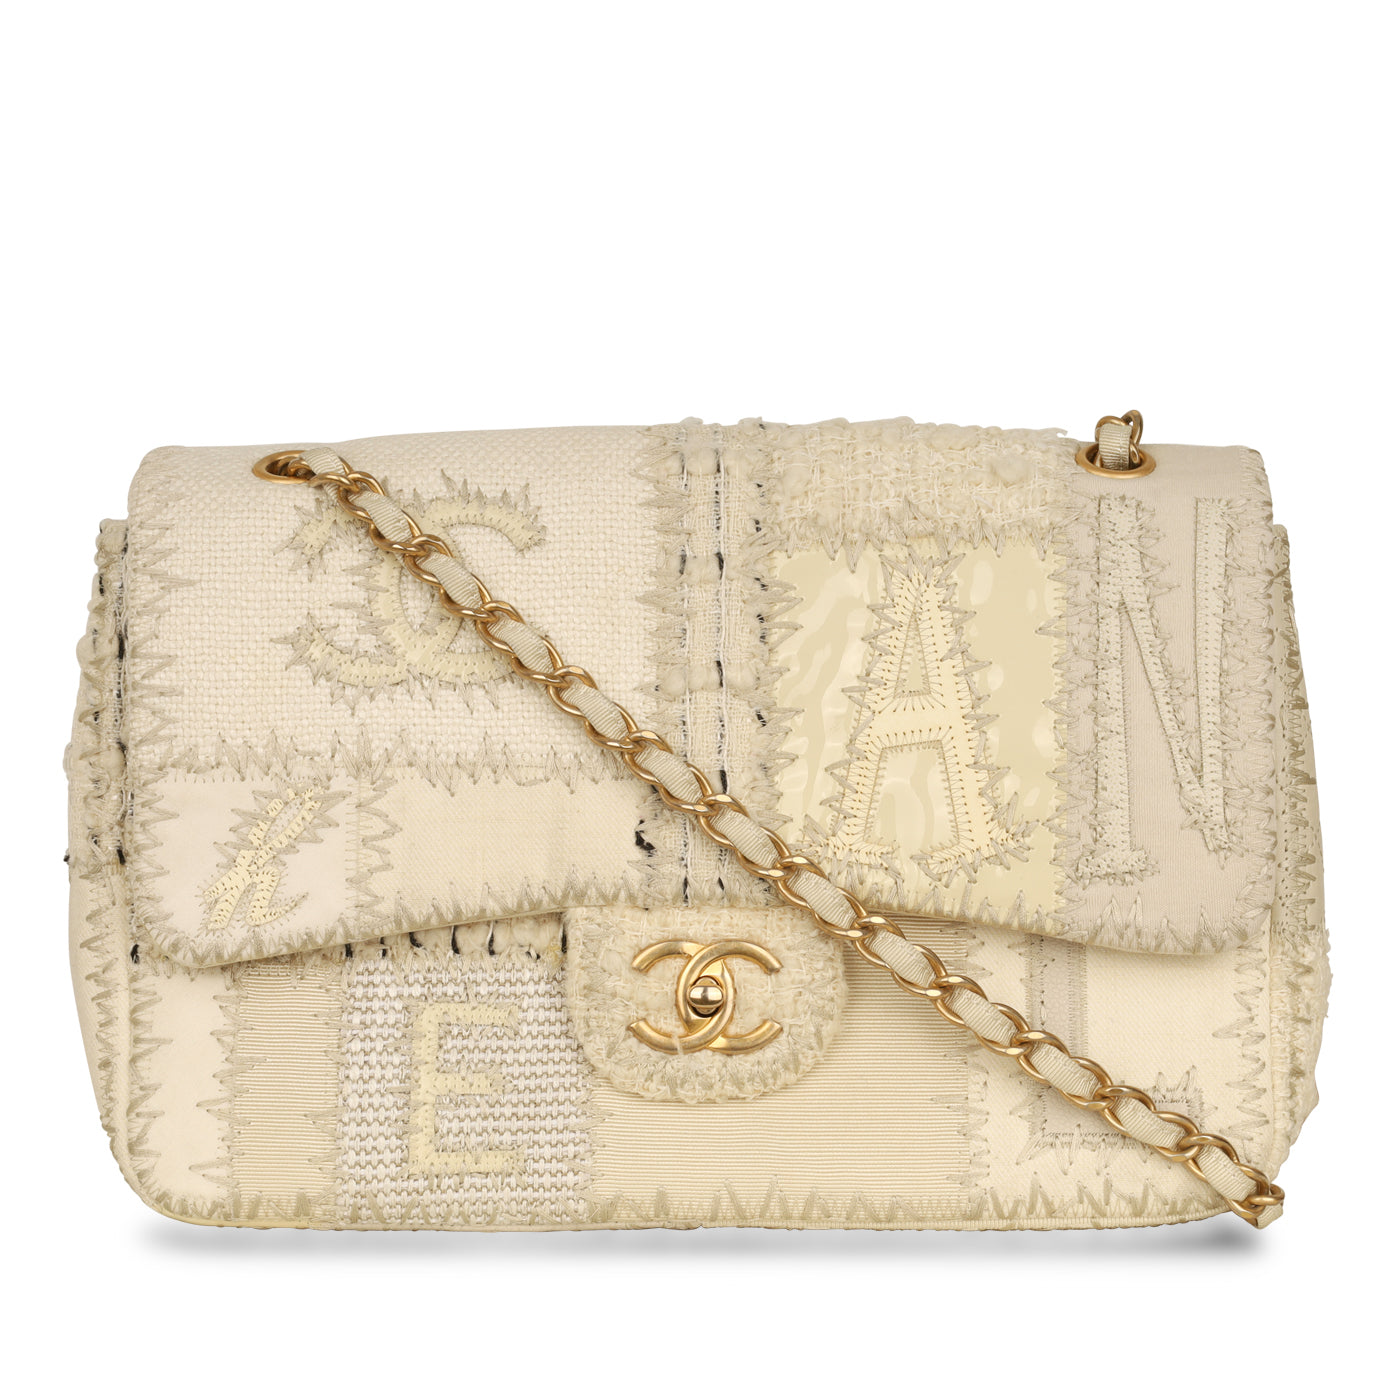 Chanel - Patchwork Classic Flap Bag - Jumbo - Cream - Pre Loved